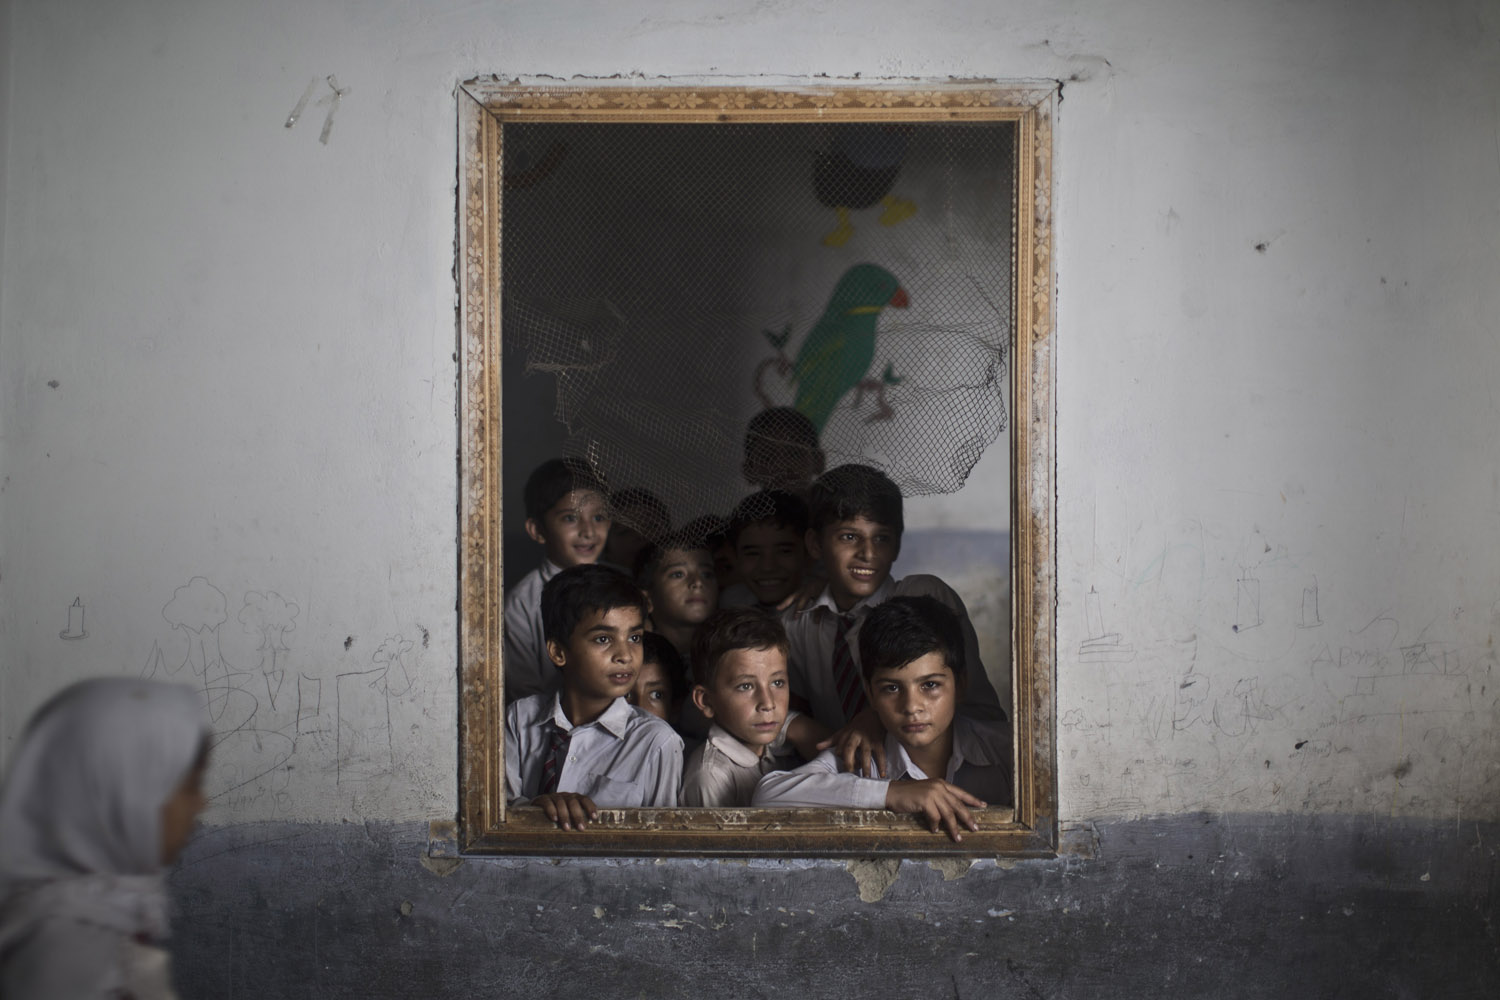 Oct. 9, 2013. Pakistani schoolboys look out the window of their classroom at other classmates chanting prayers to commemorate the anniversary of Malala's shooting by Taliban, at a school in Rawalpindi, Pakistan.